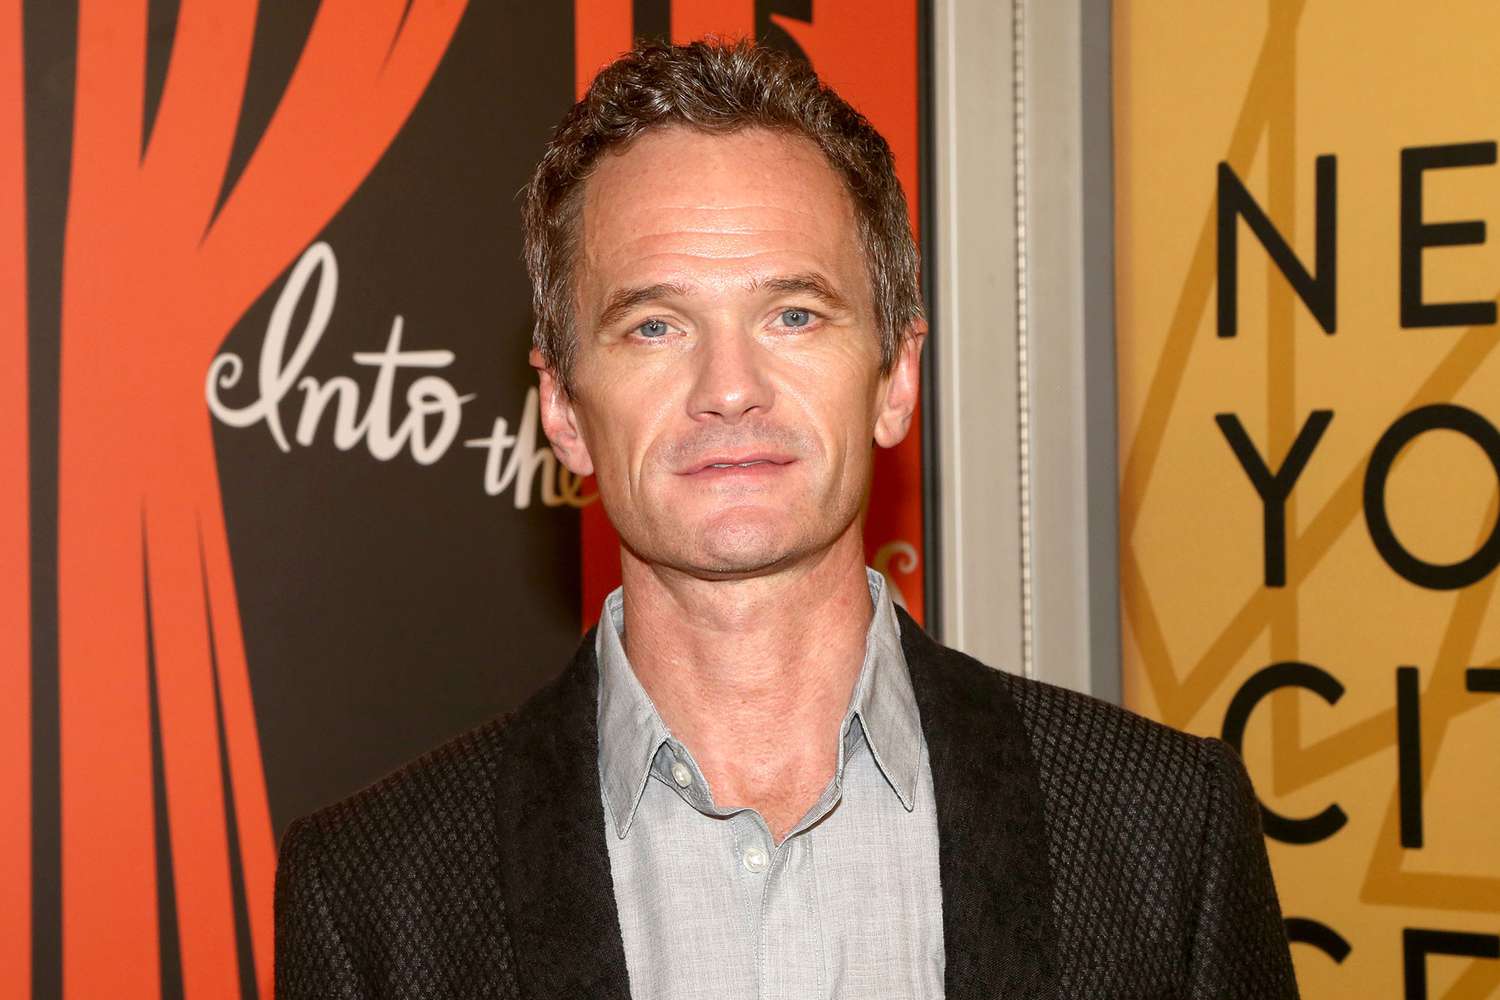 Neil Patrick Harris got final approval of 'Uncoupled' dick pic